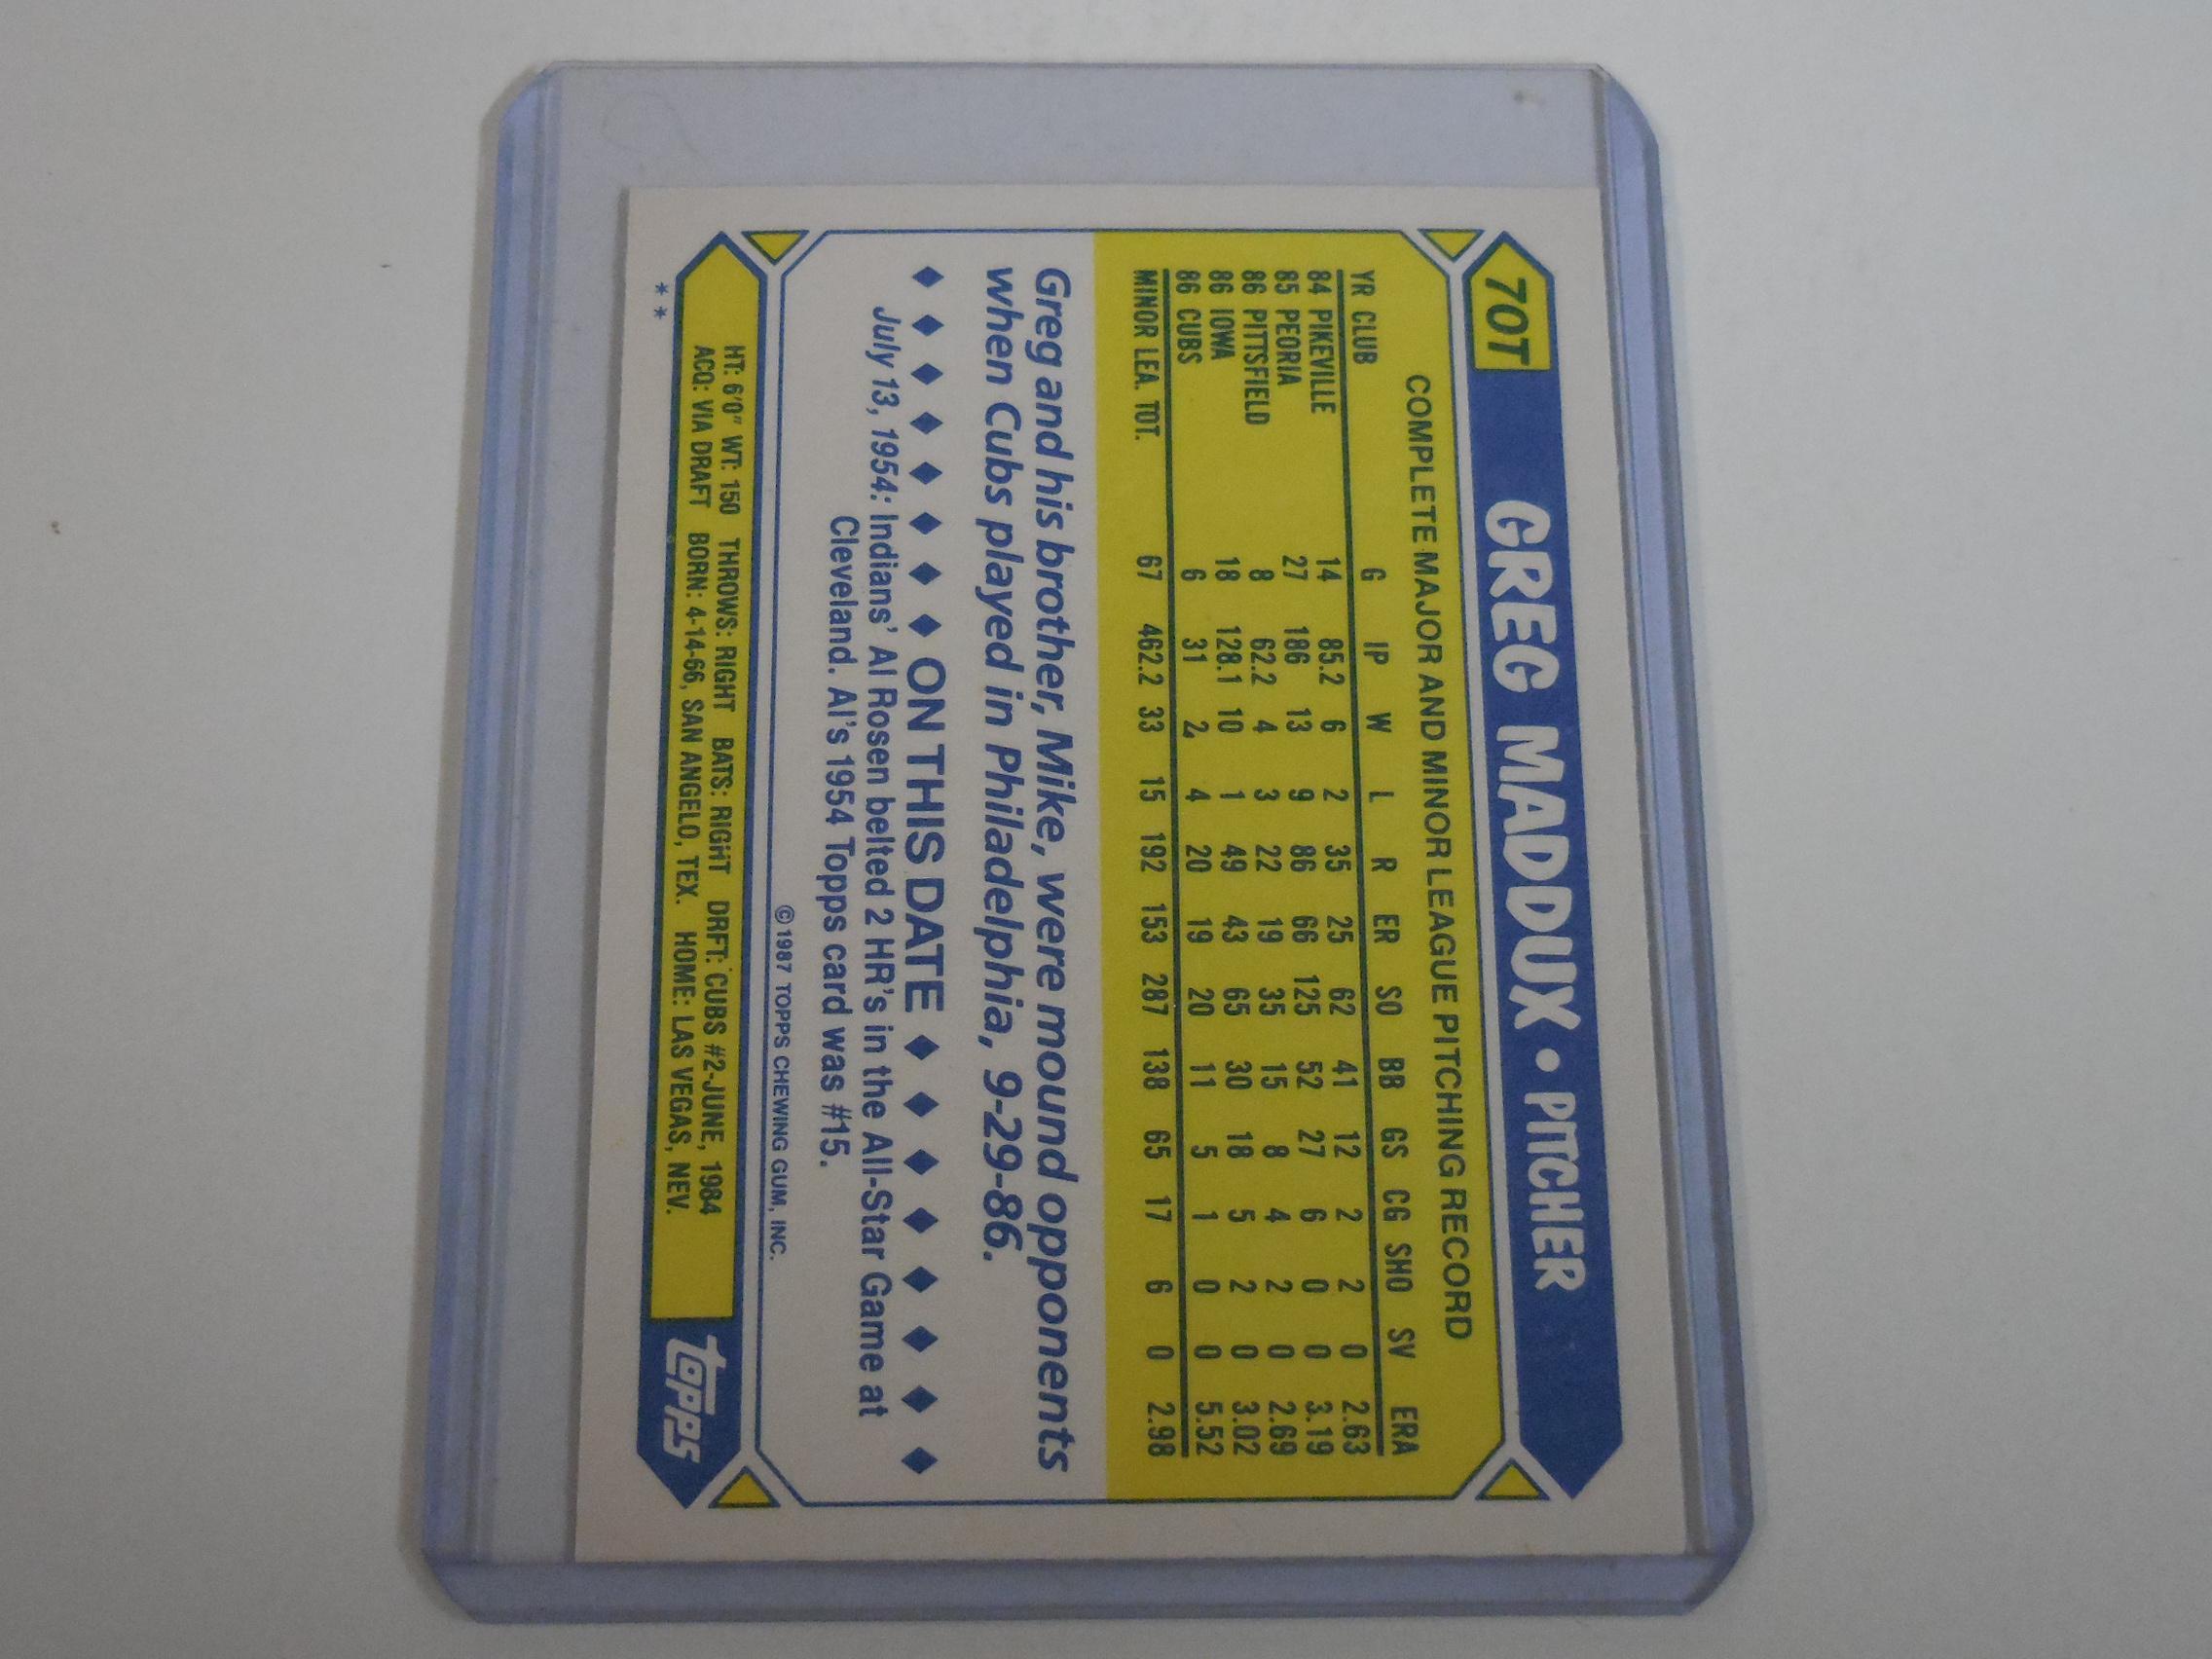 1987 TOPPS TRADED #70T GREG MADDUX ROOKIE CARD CHICAGO CUBS HOF RC